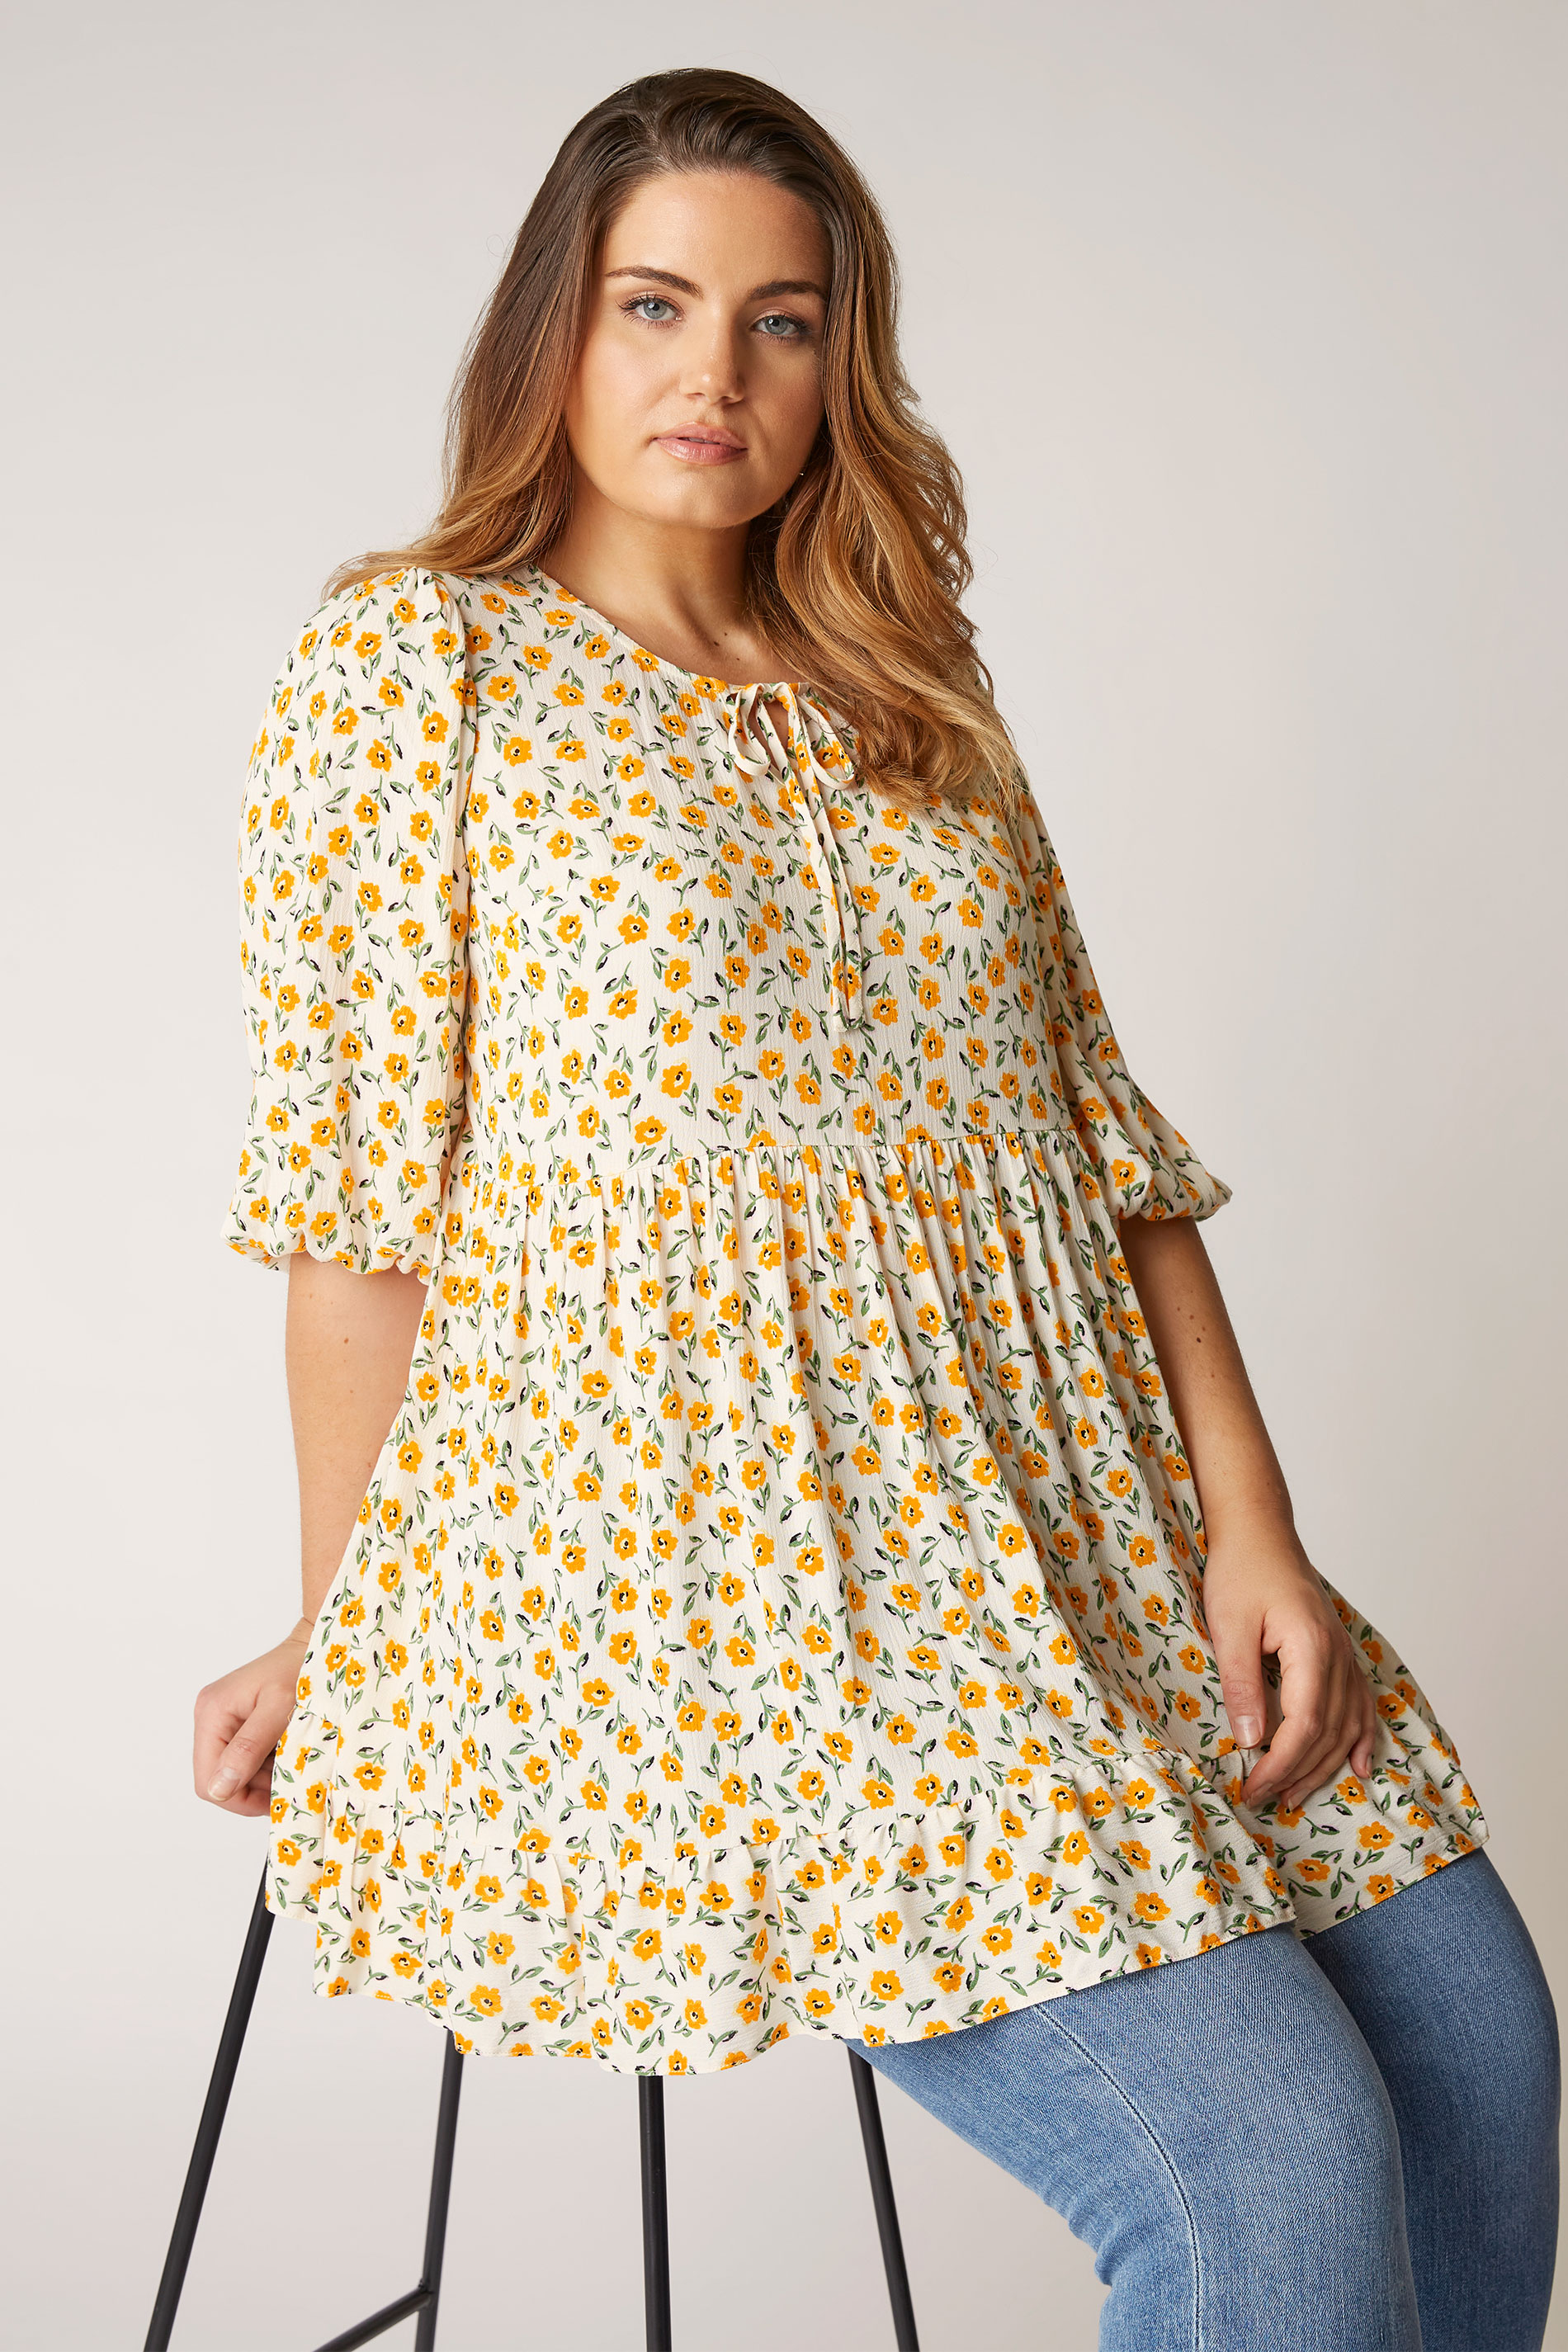 THE LIMITED EDIT White & Yellow Floral Frill Hem Tunic_A.jpg